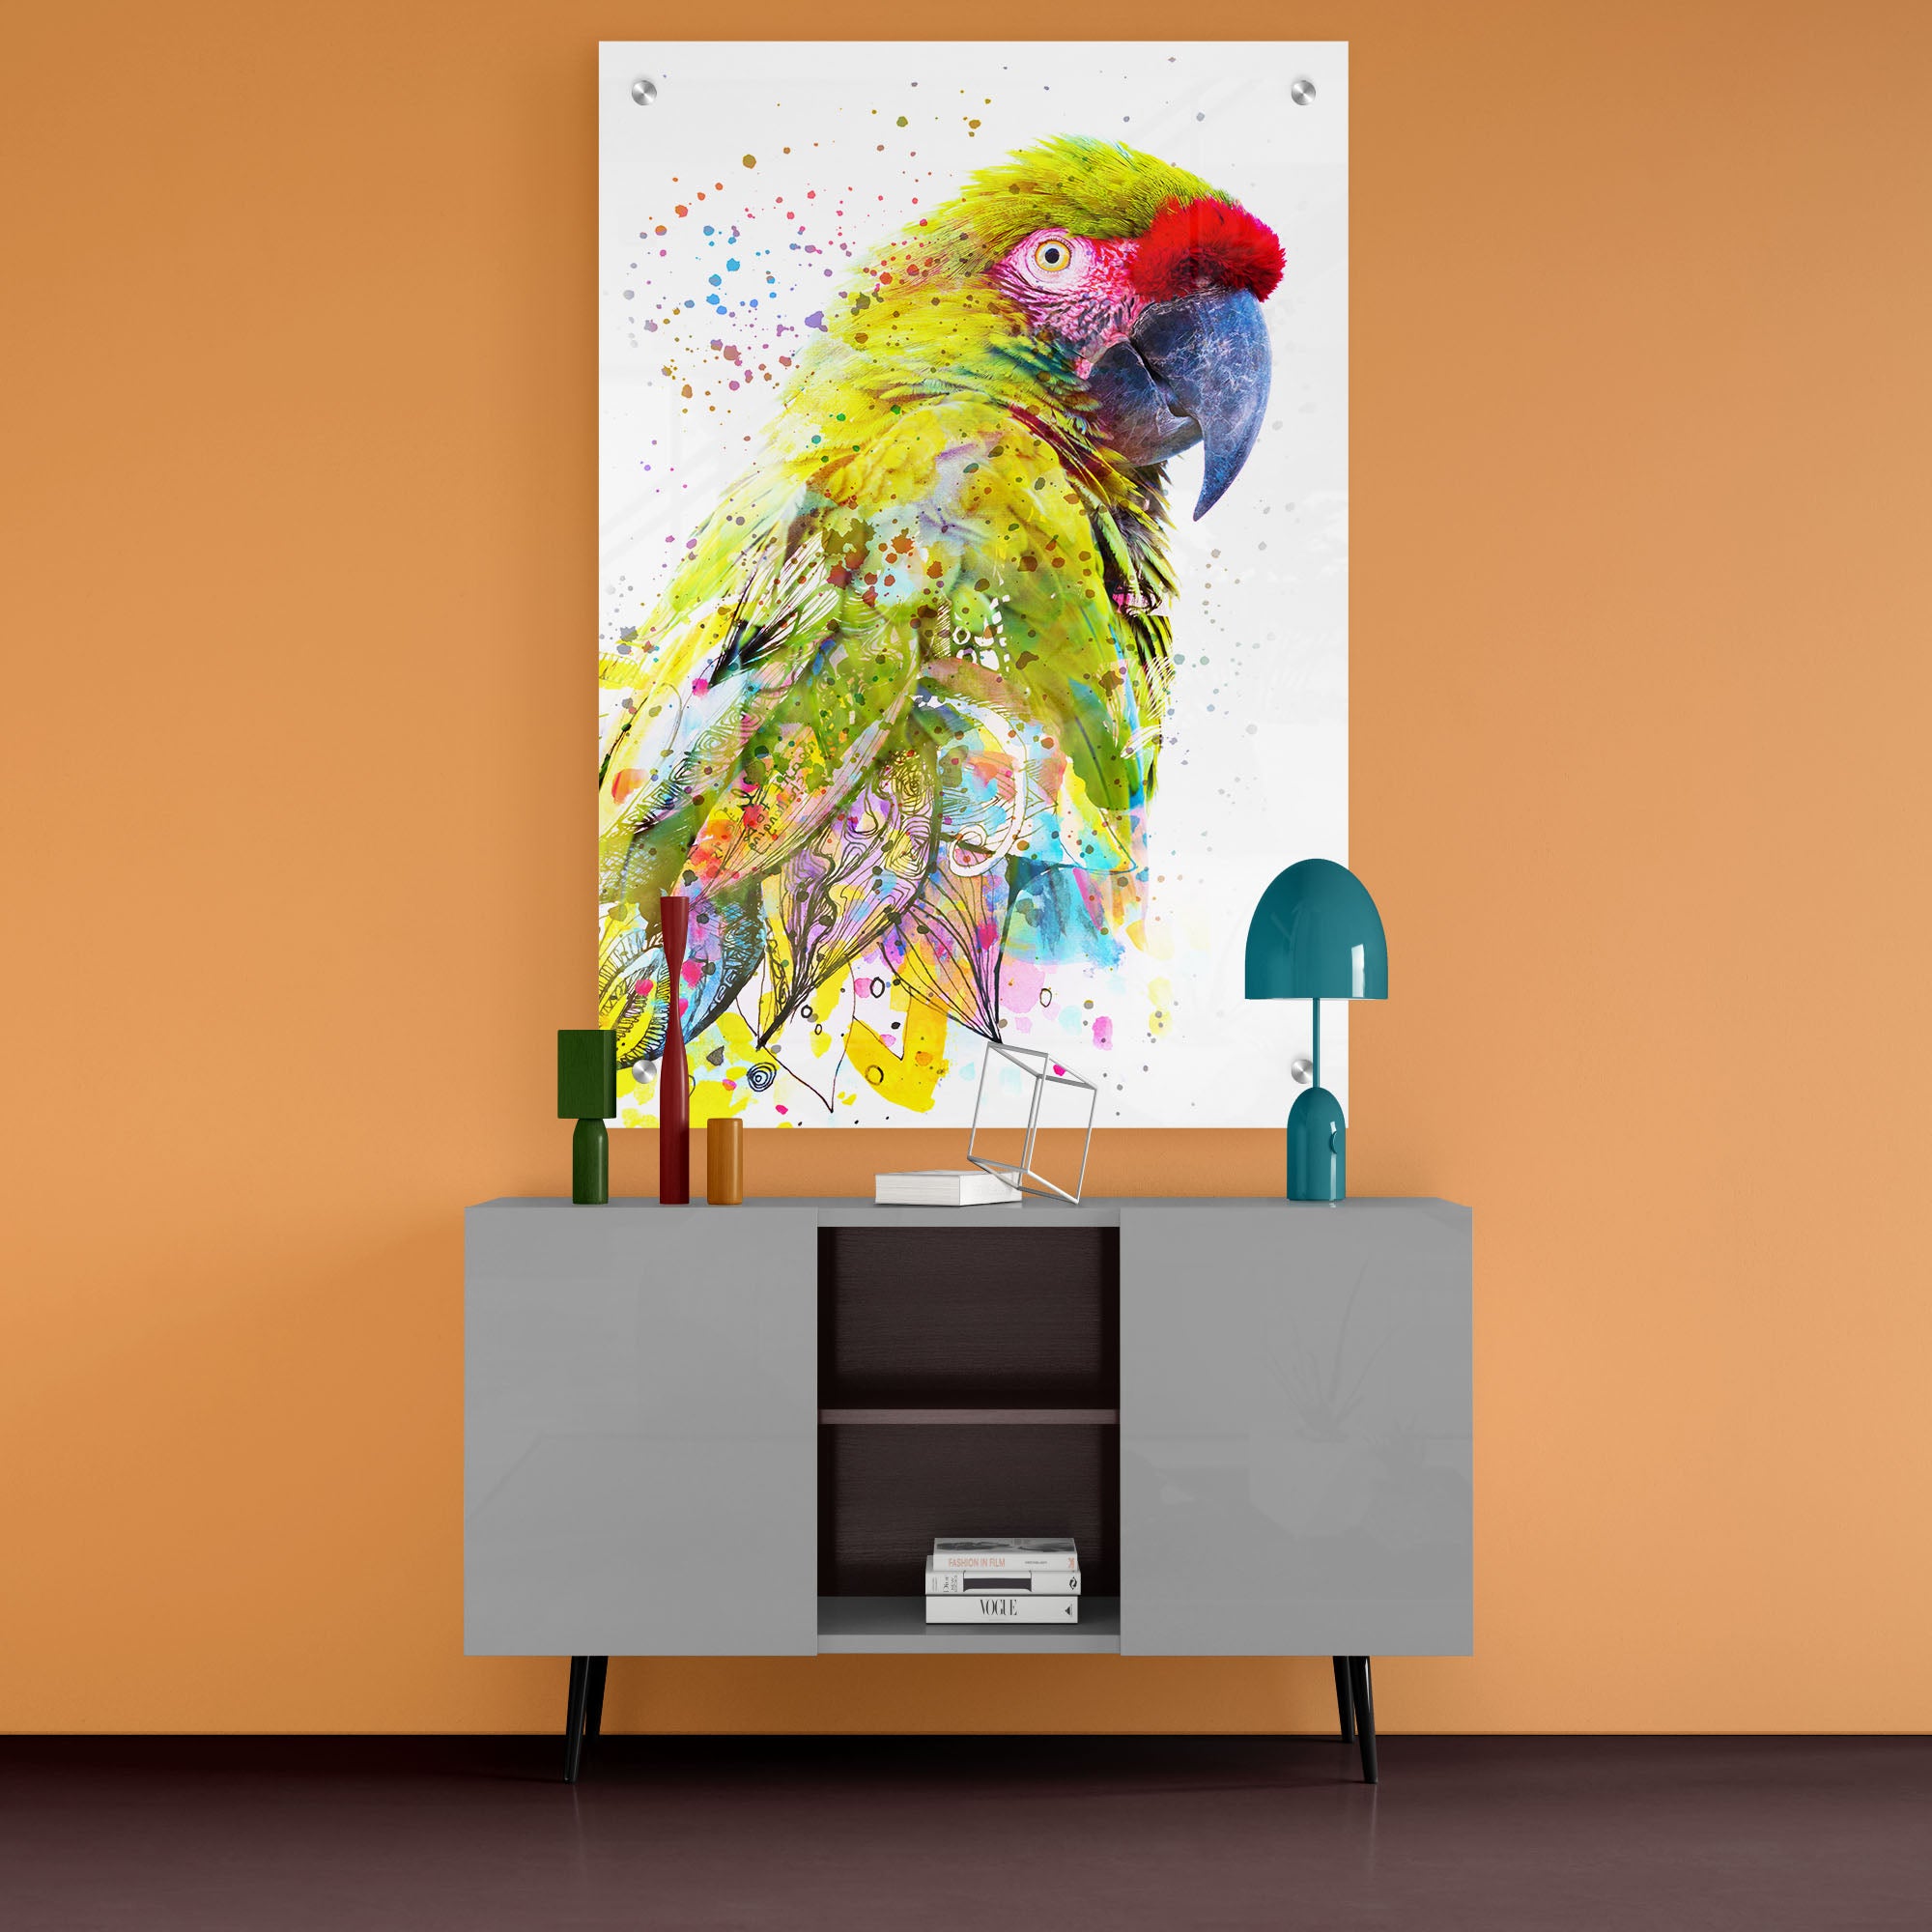 Colourful Parrot Wall Art Acrylic Wall Painting